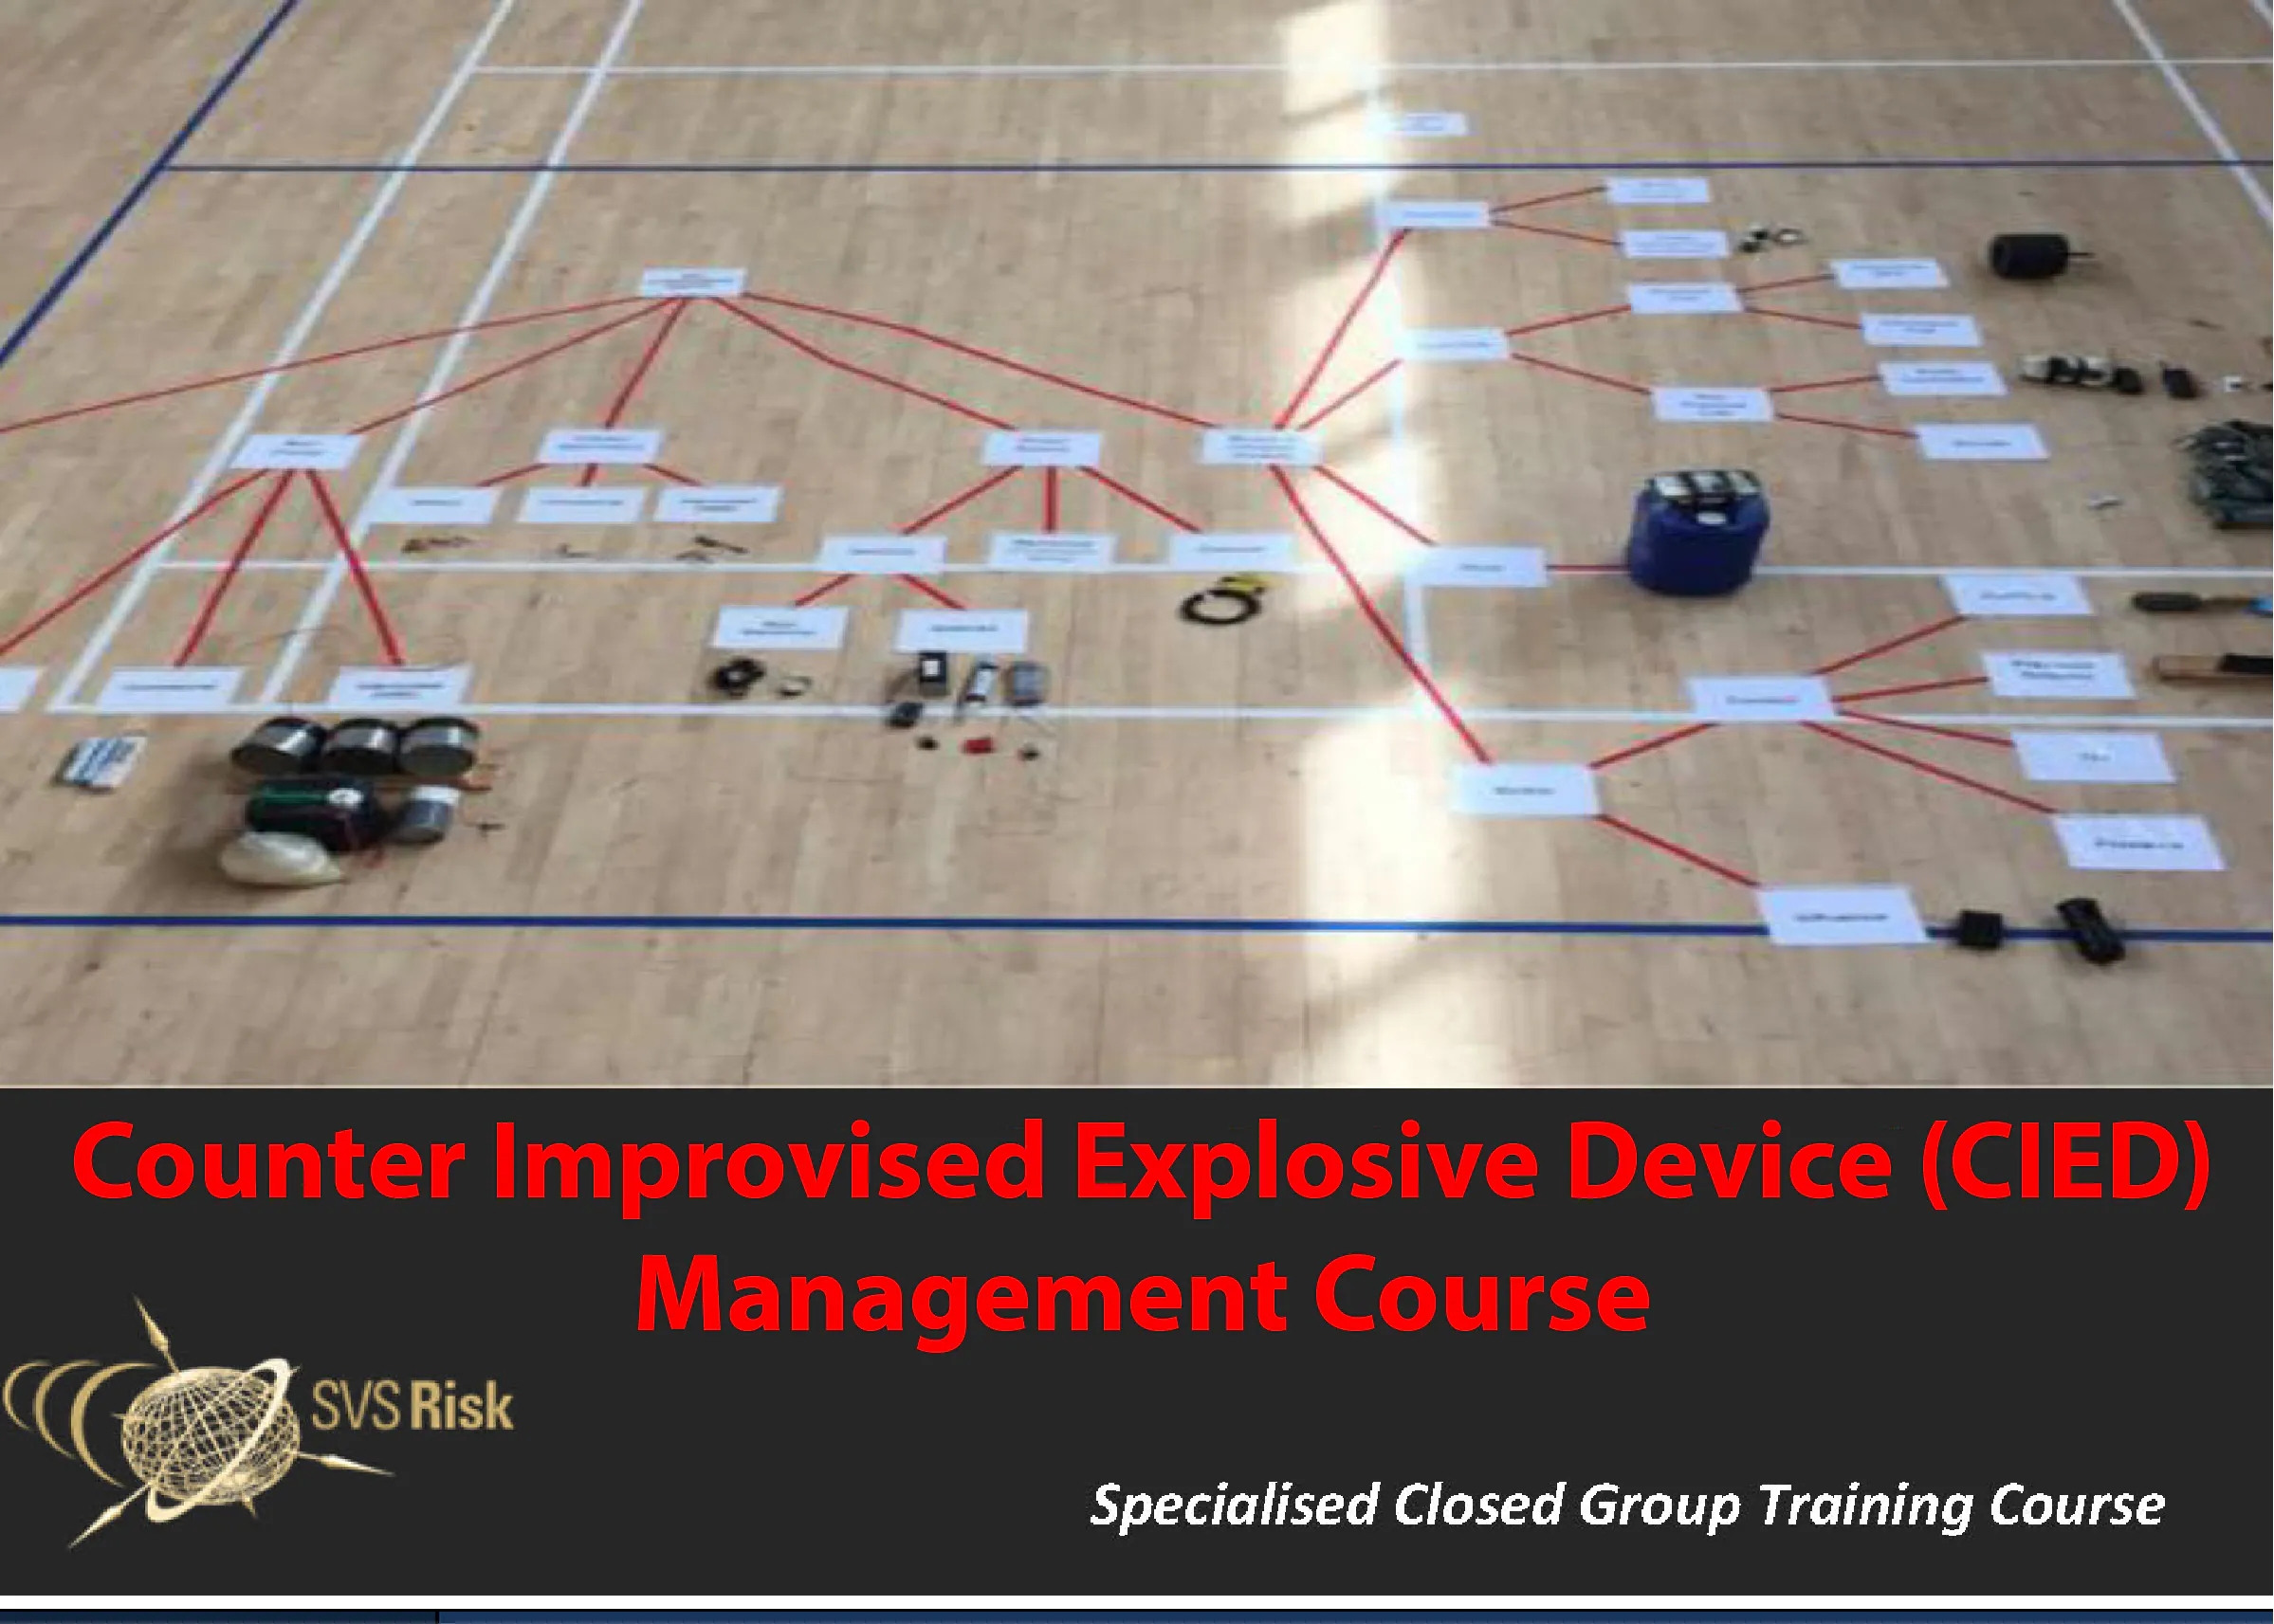 Counter Improvised Explosive Device (CIED) Management Course